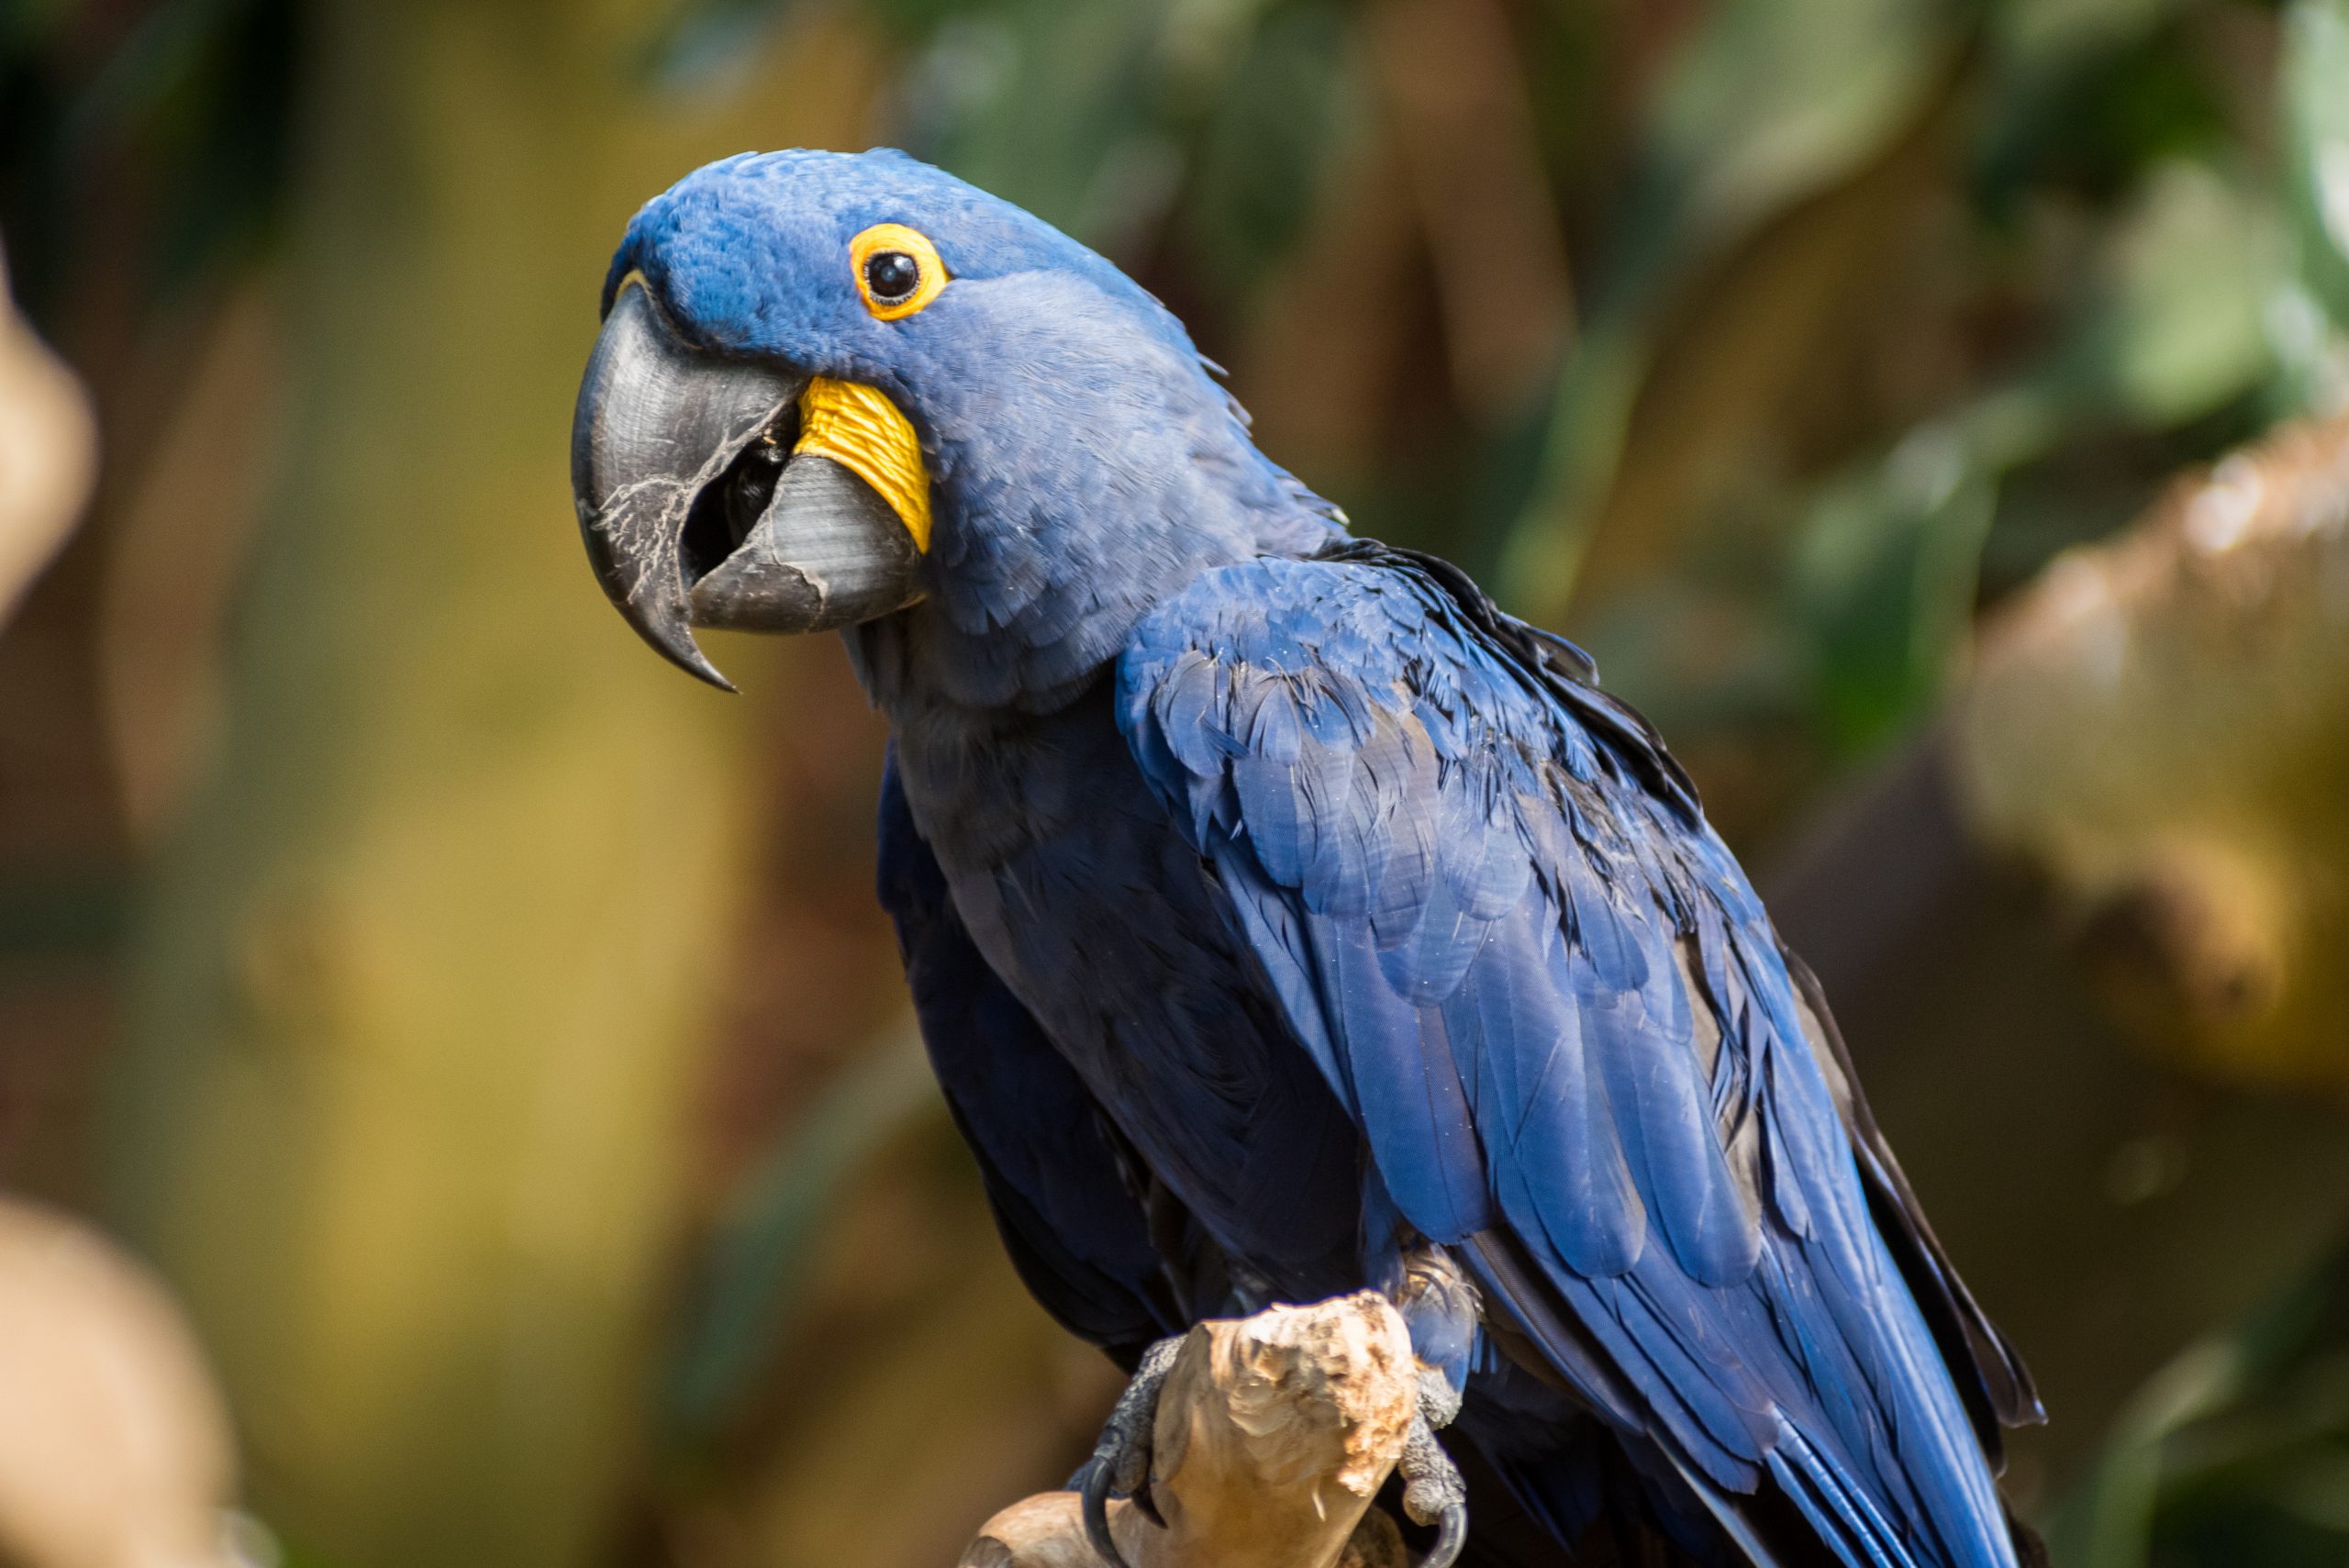 Hyacinth Macaw perched on a branch